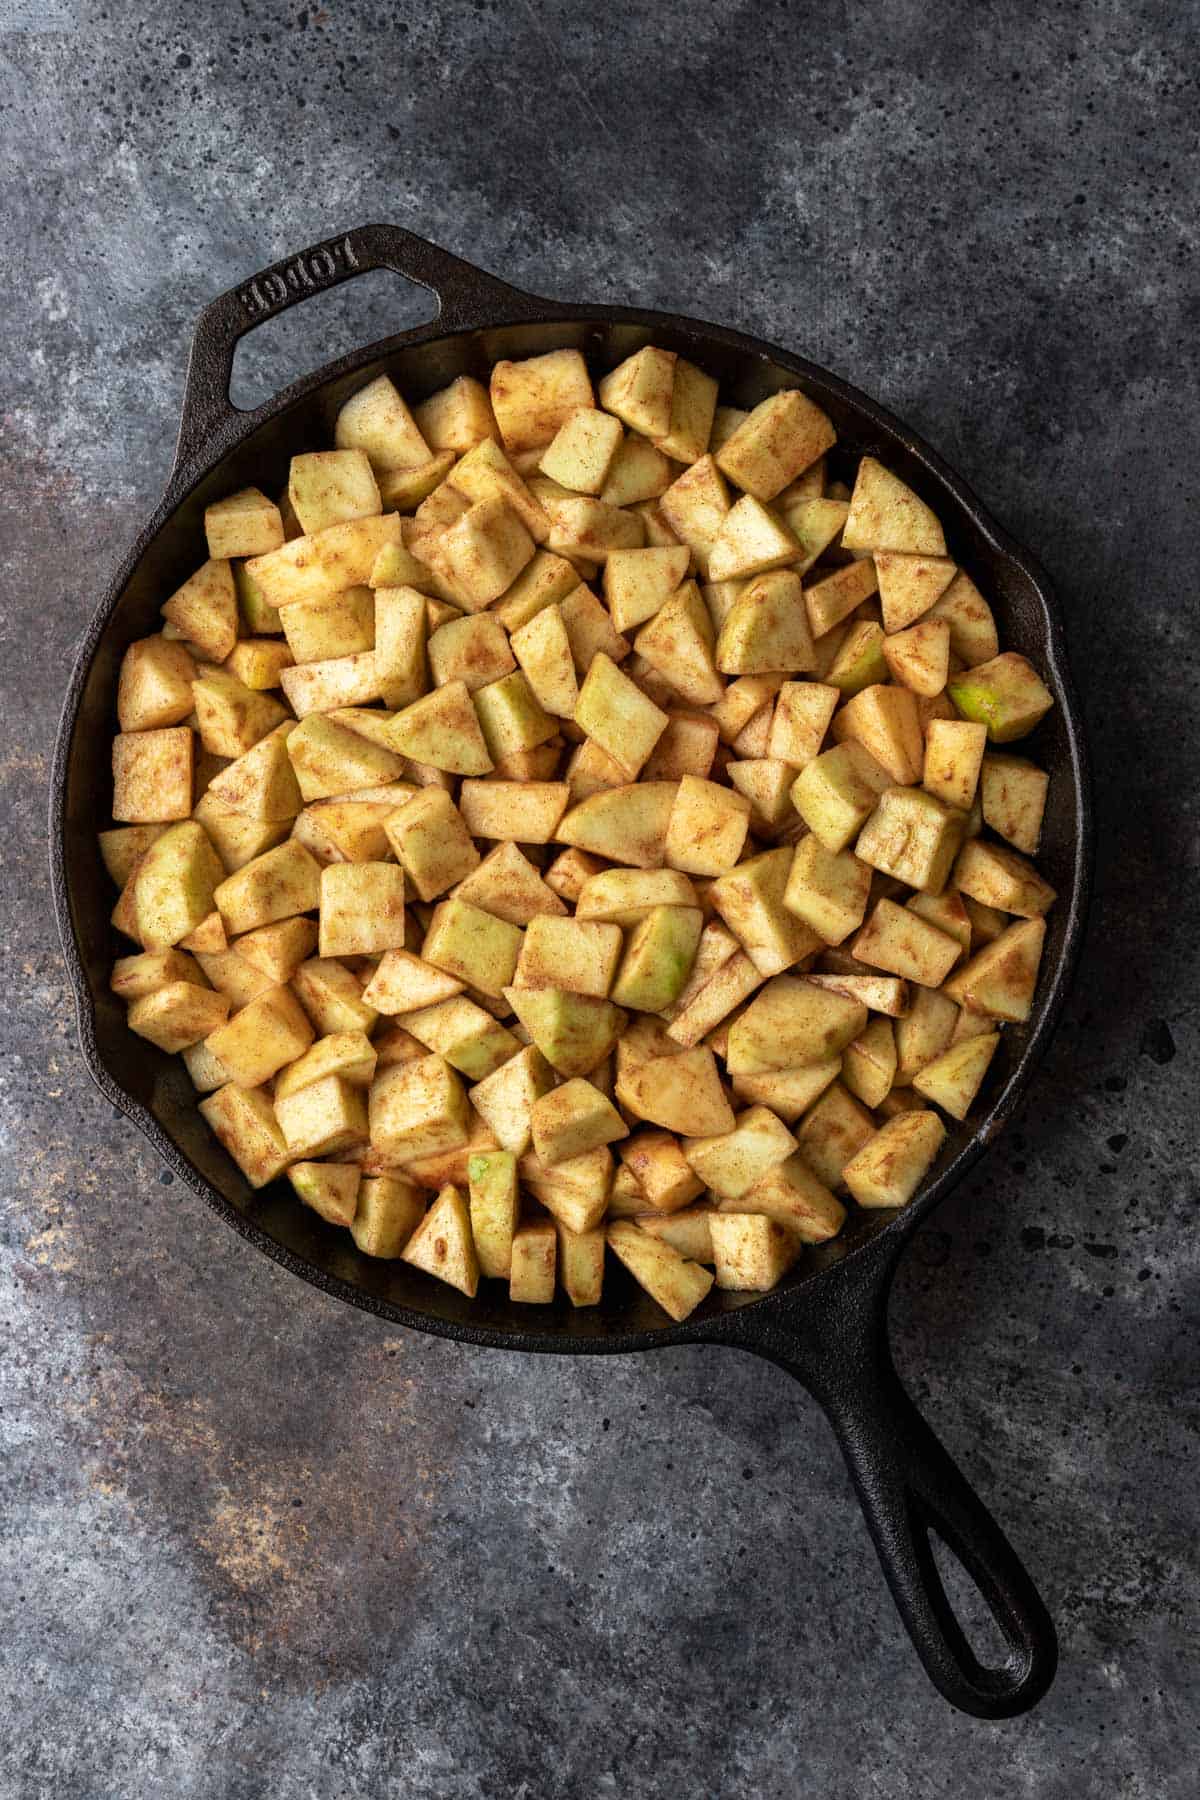 Diced apples mixed with caramel sauce in prepared cast iron skillet.